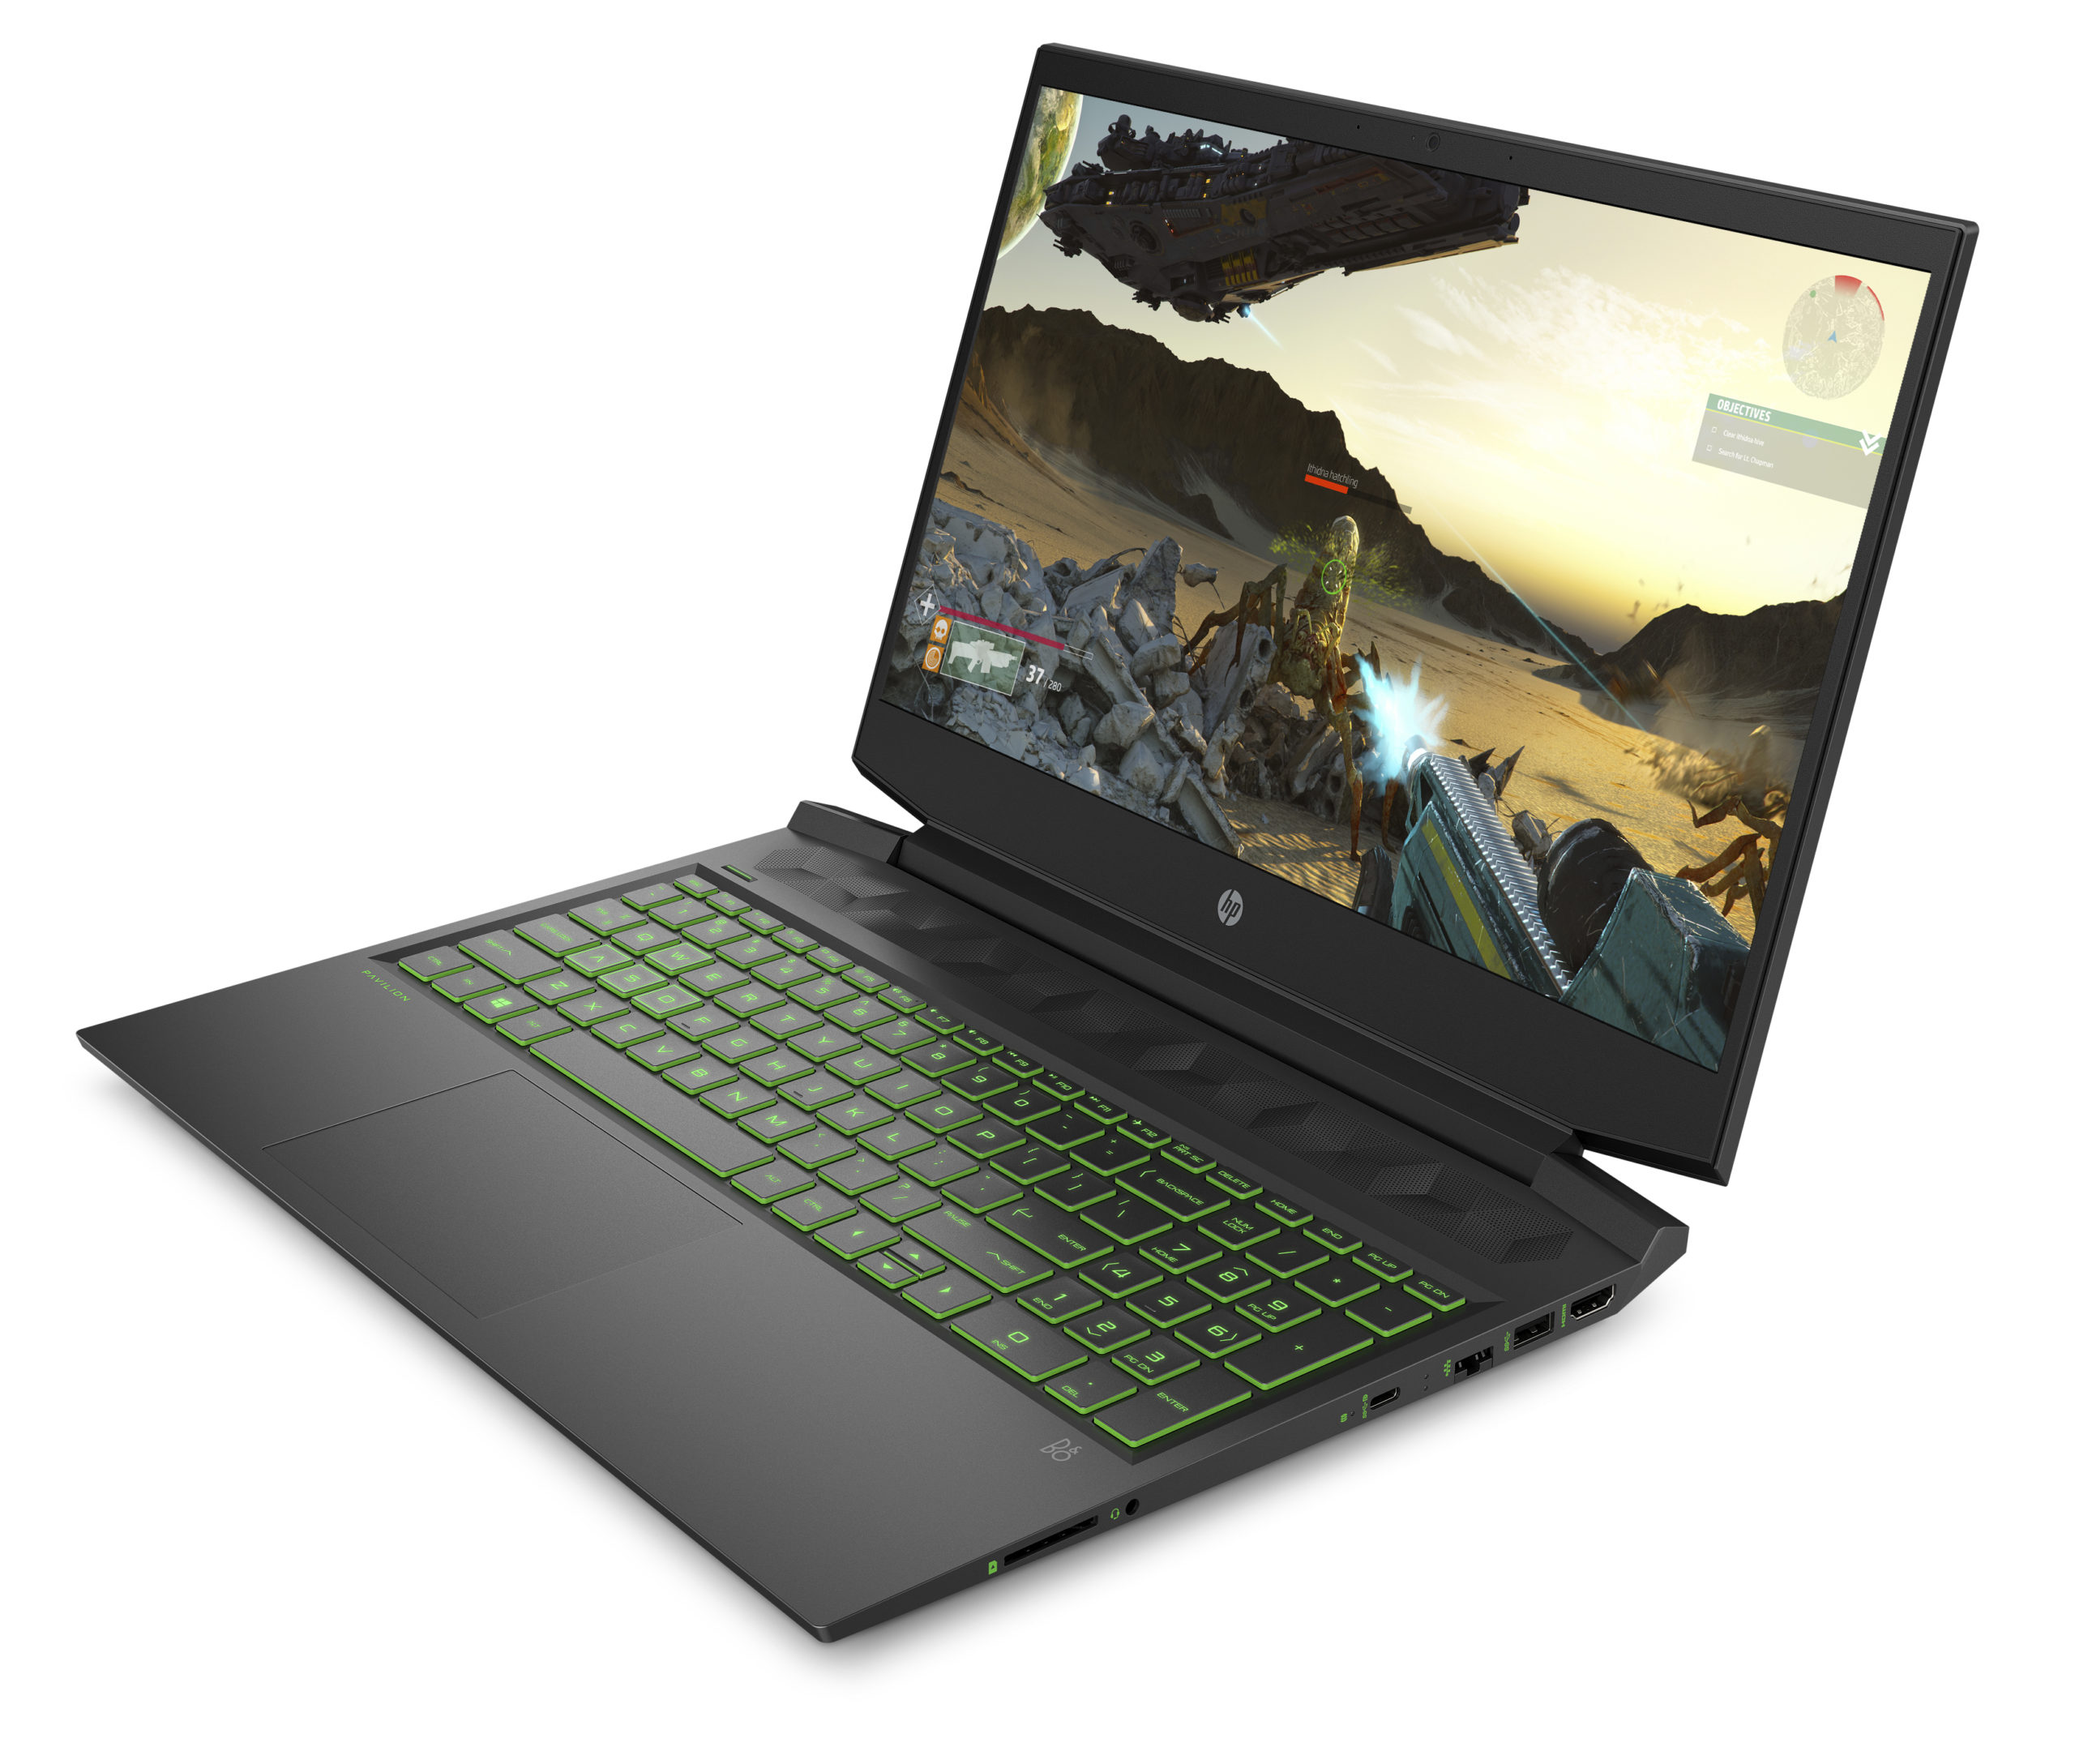 HP reimagines OMEN 15 laptop and introduces Pavilion Gaming 16